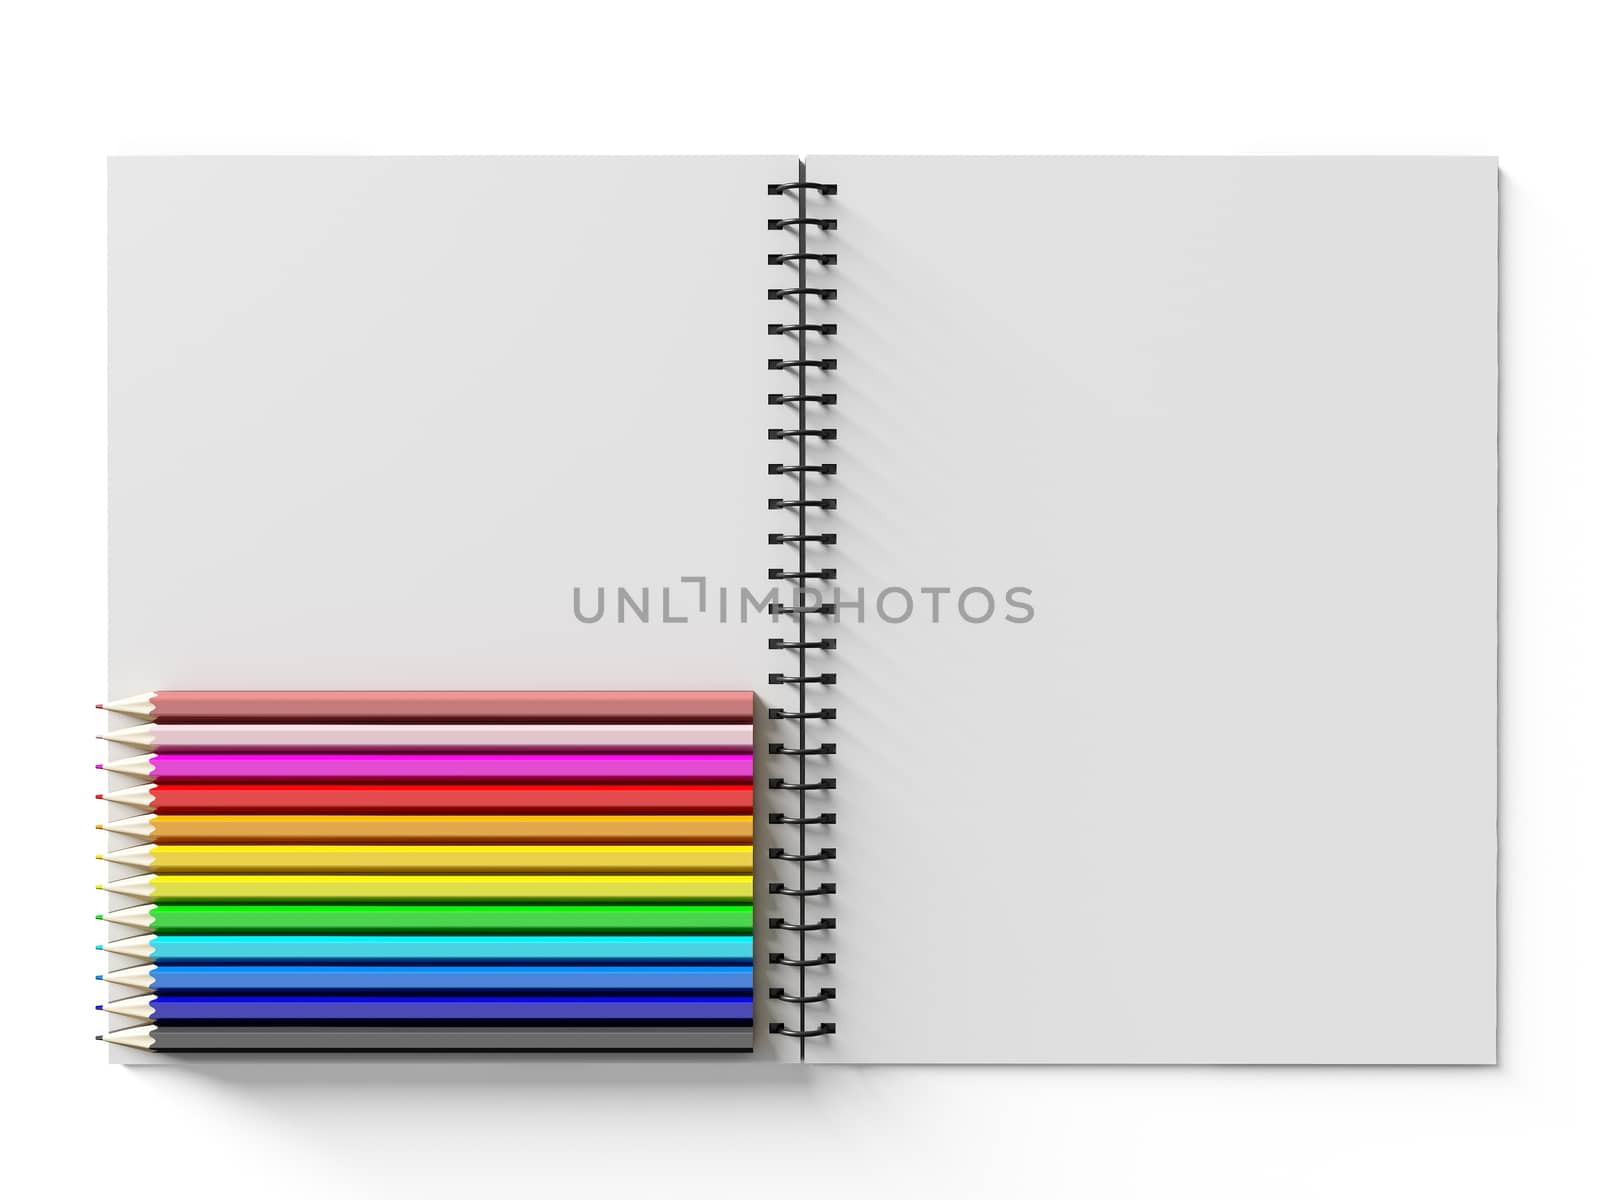 notebook with colored pencils on White background, stationary object